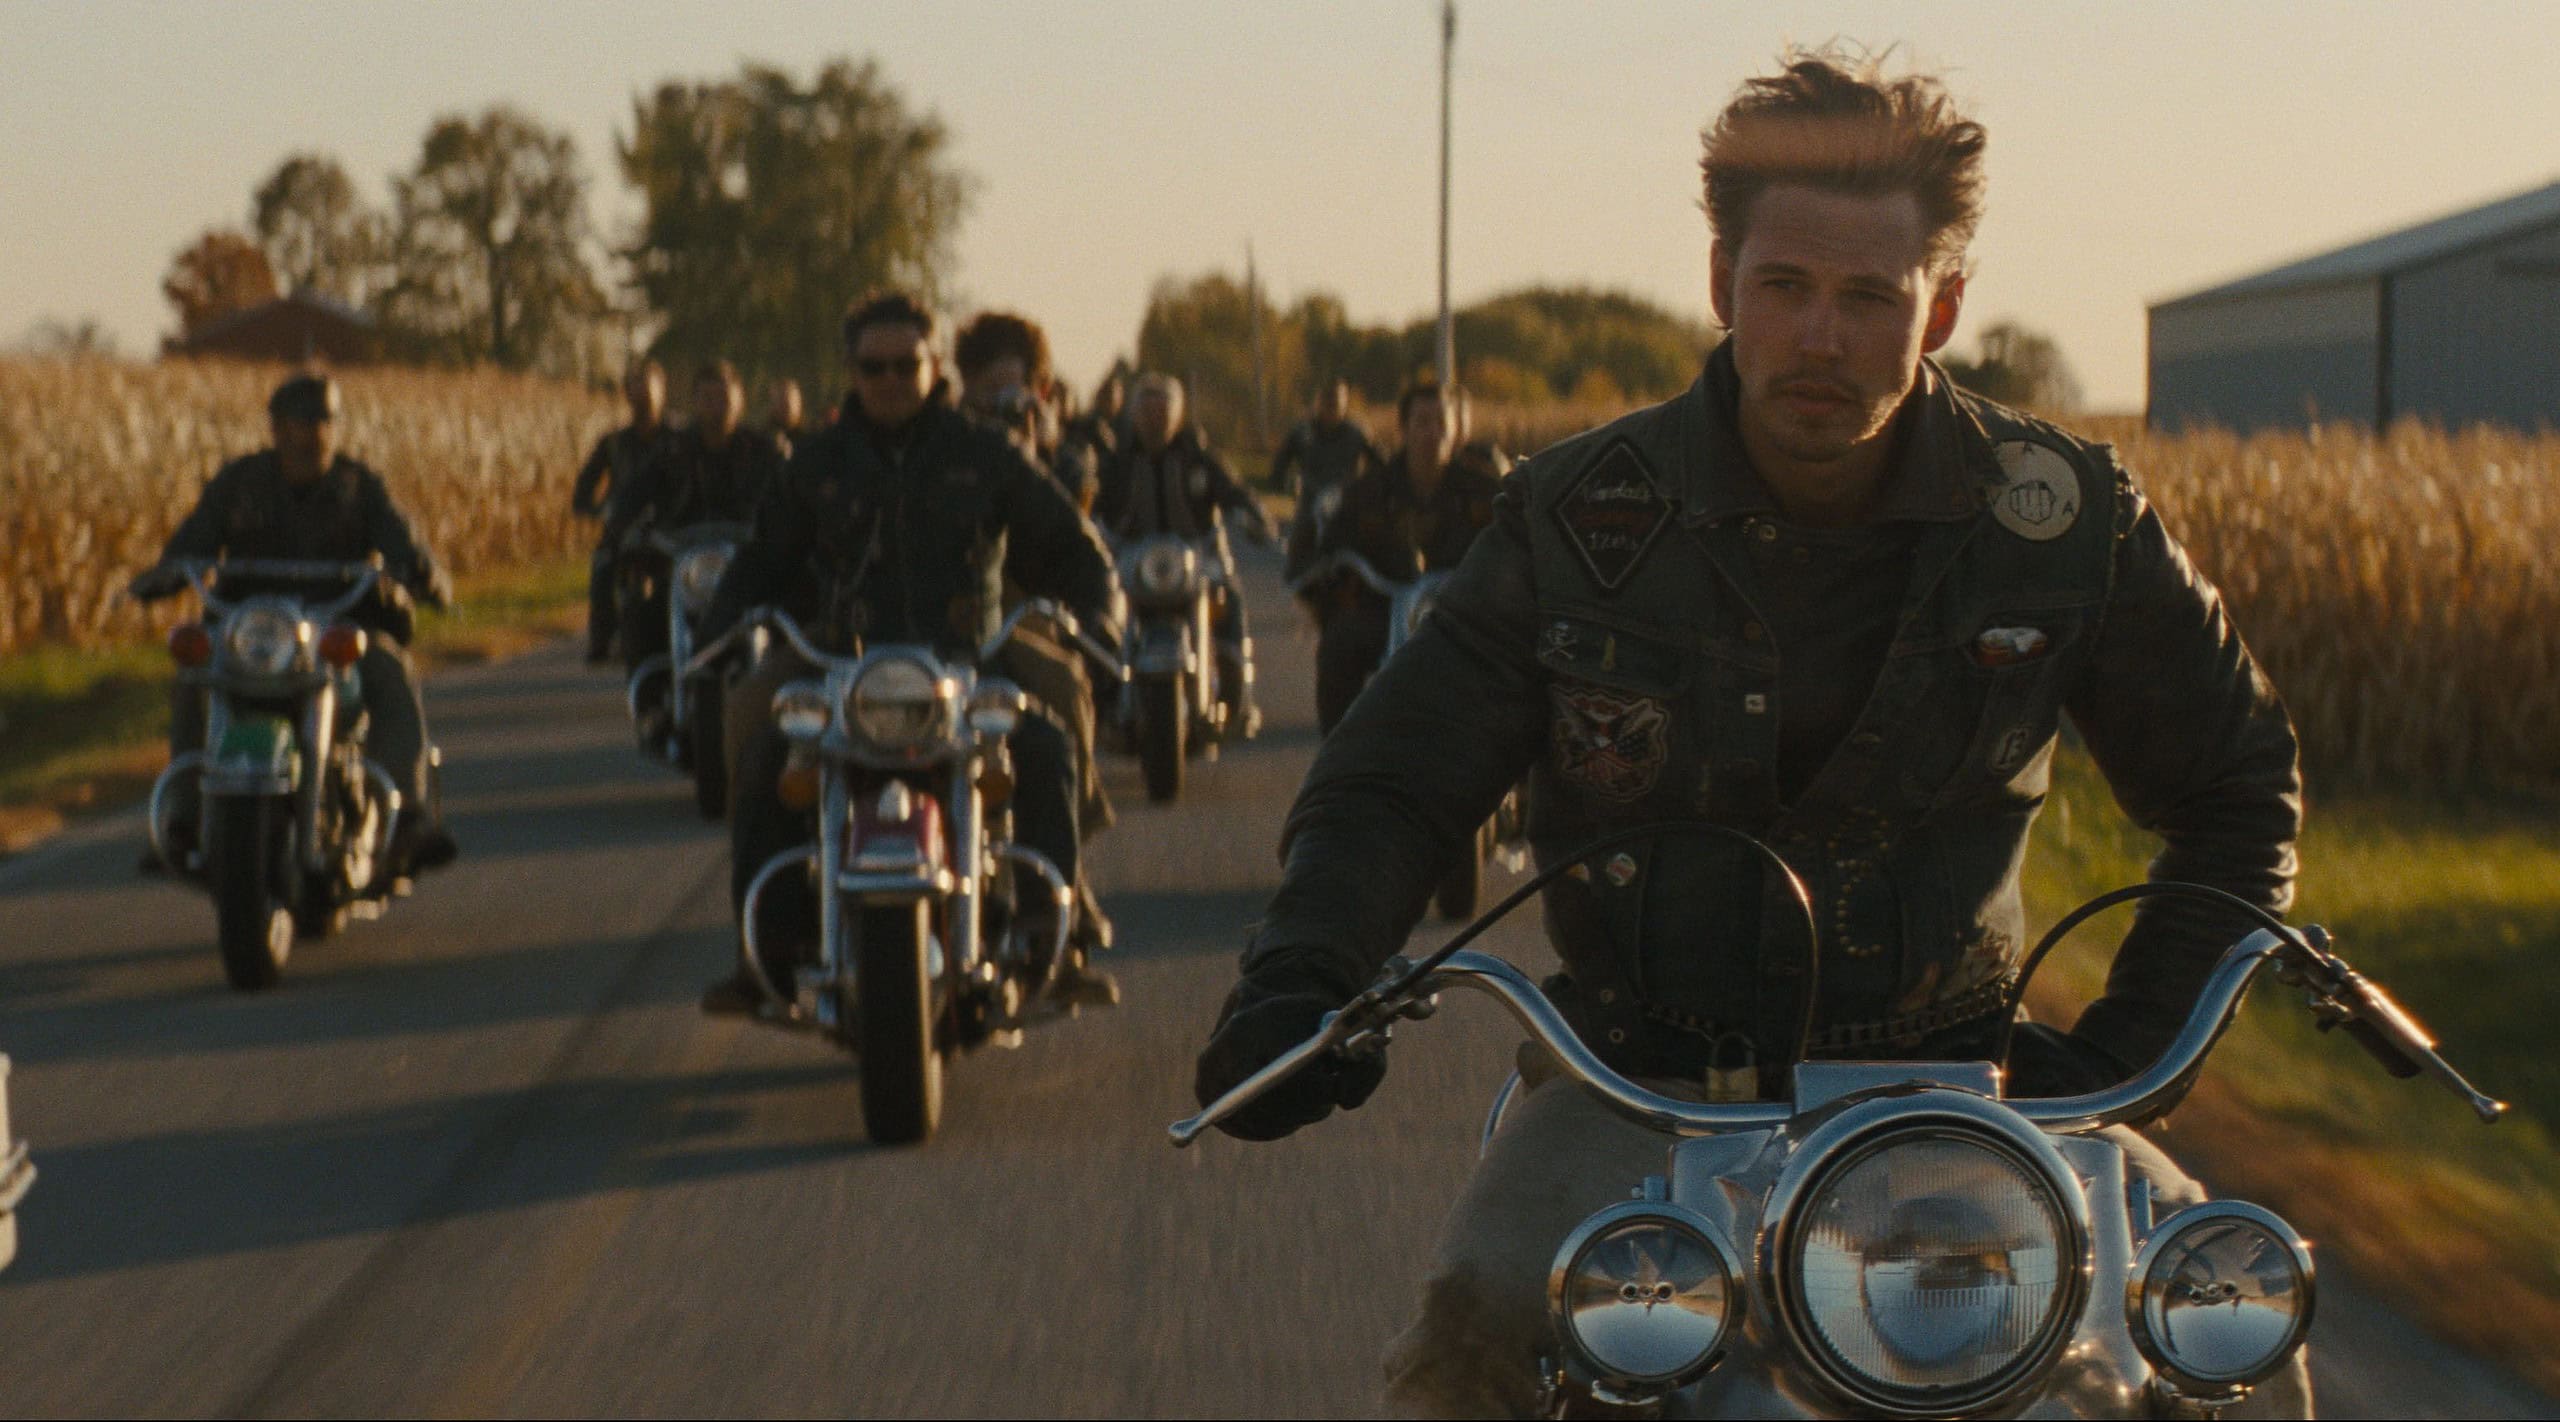 Enter to Win Passes for The Bikeriders St. Louis Advance Screening